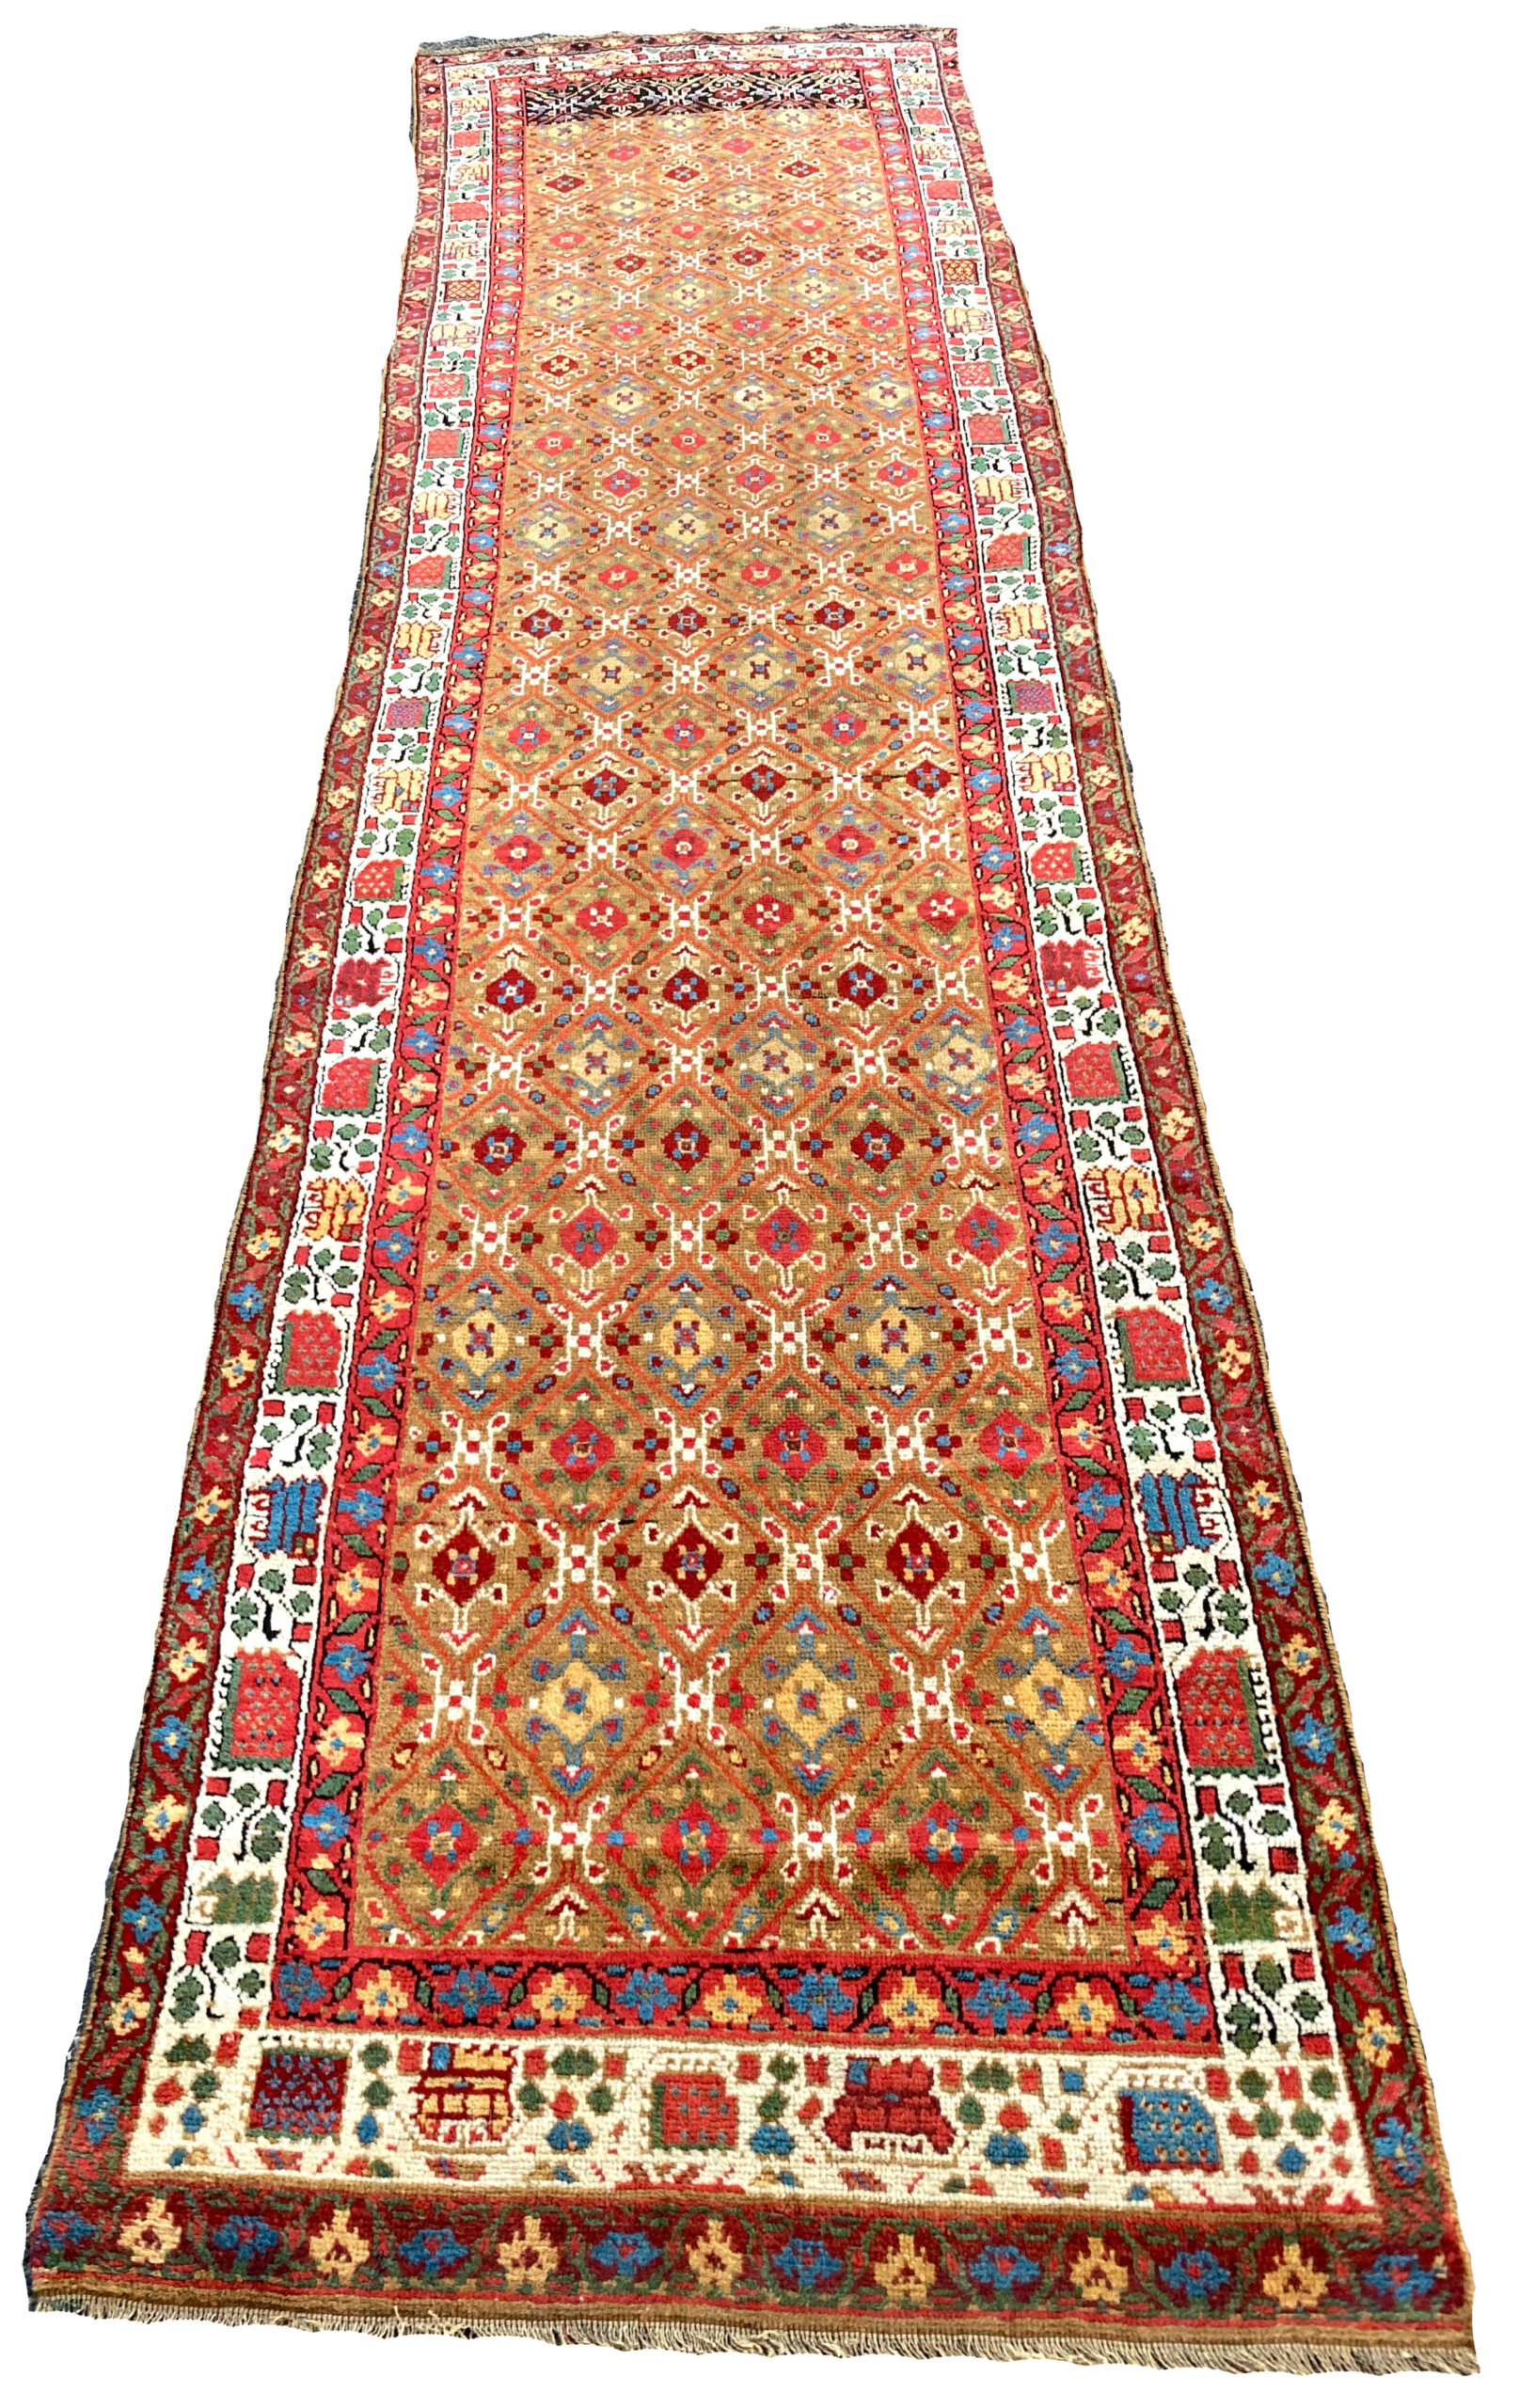 19th century antique northwest Persian runner with geometric motifs on a camel color field - Douglas Stock Gallery, antique Persian rugs Boston,MA area, South Natick